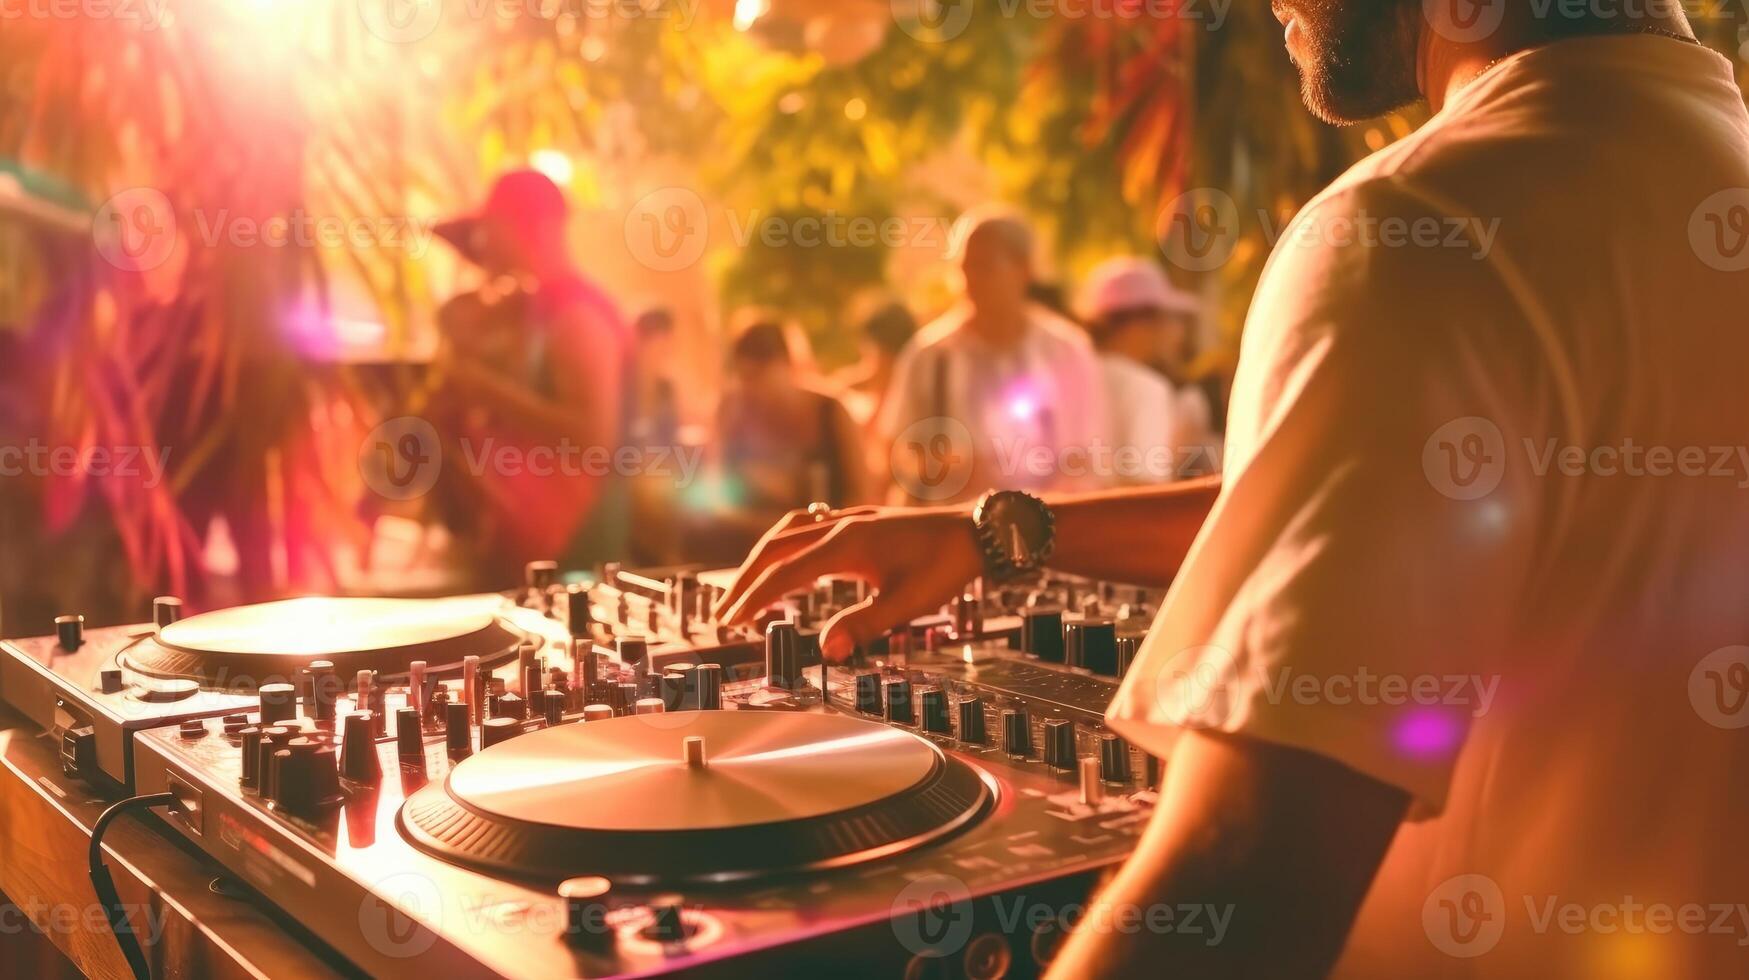 Dj playing music on a turntable in front of a crowd at festival, closeup photo. photo